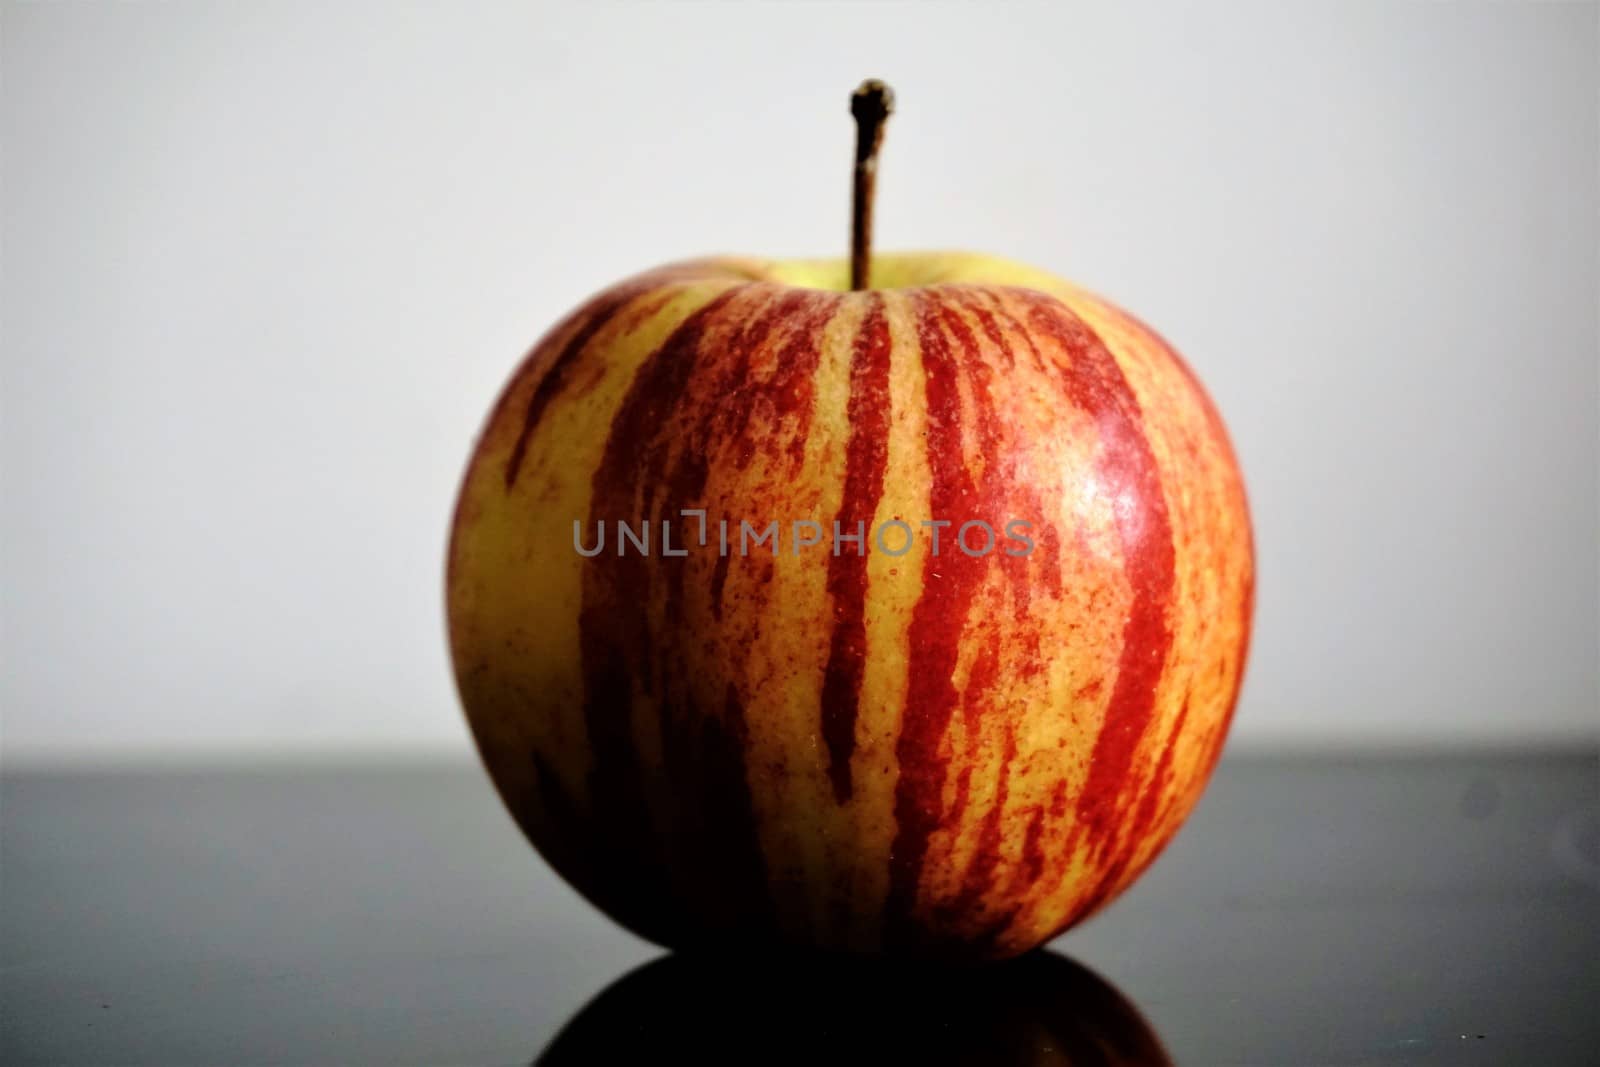 Photo of a single apple on a glass table